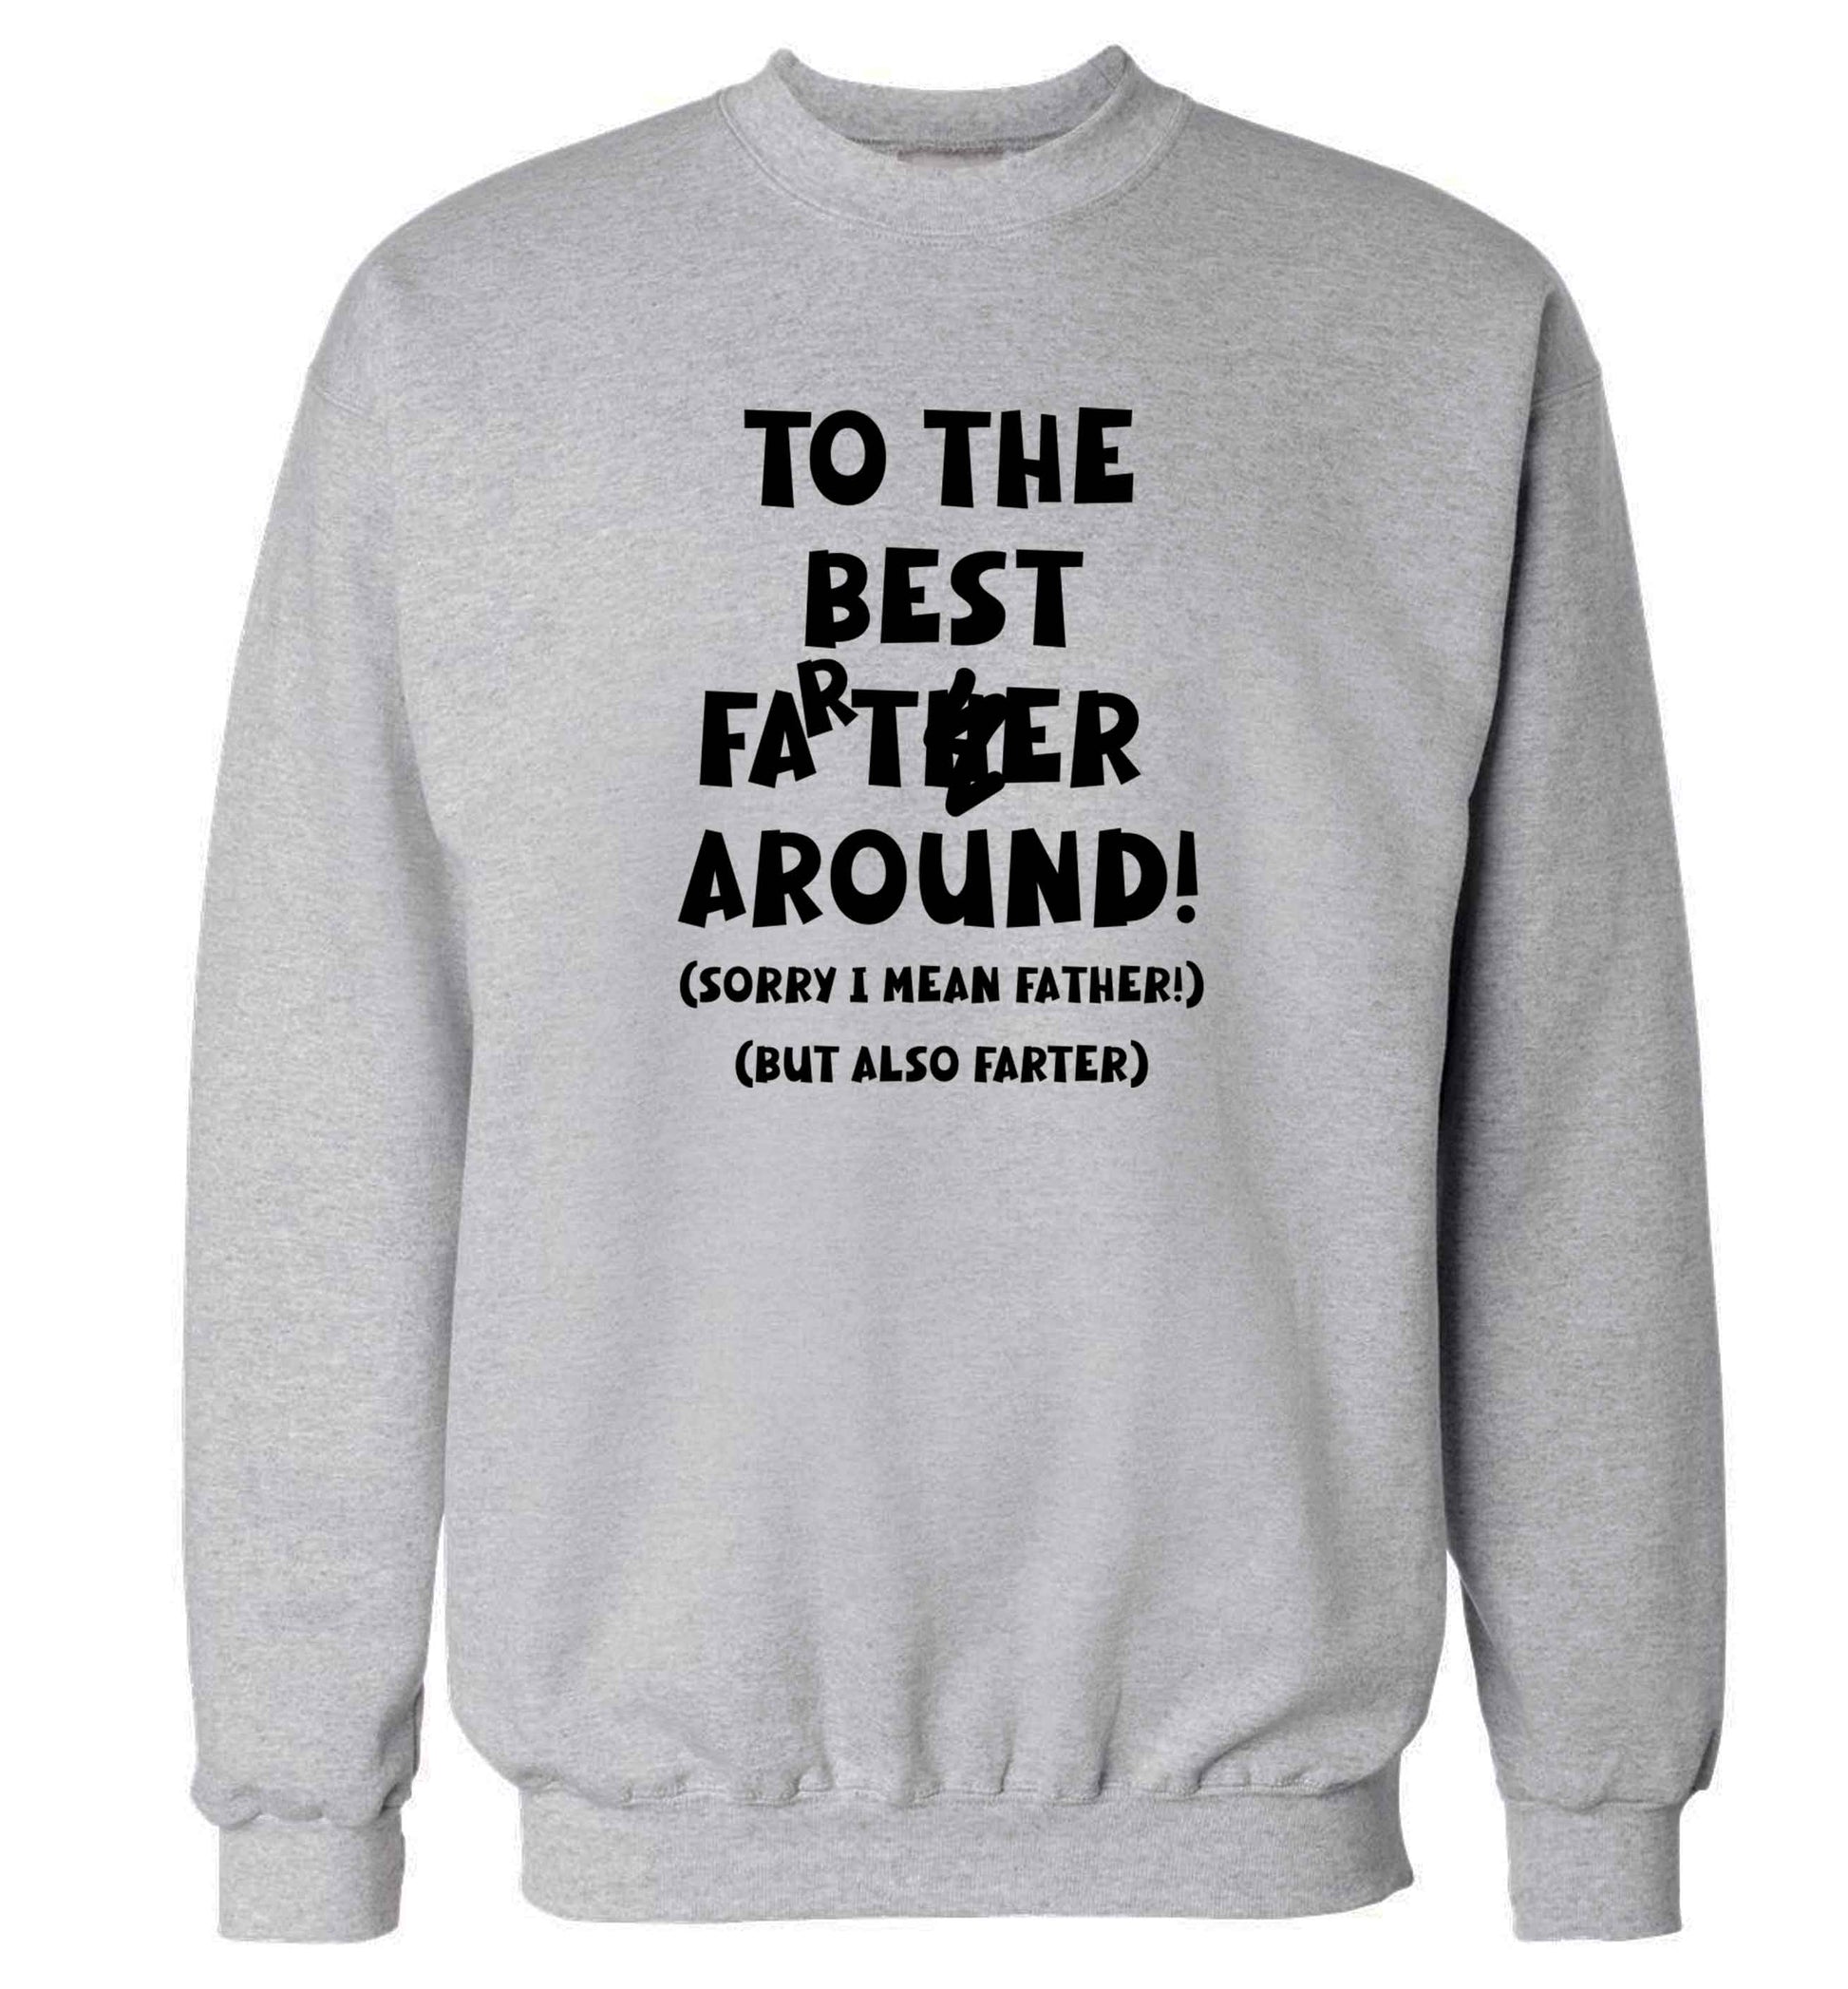 To the best farter around! Sorry I mean father, but also farter adult's unisex grey sweater 2XL